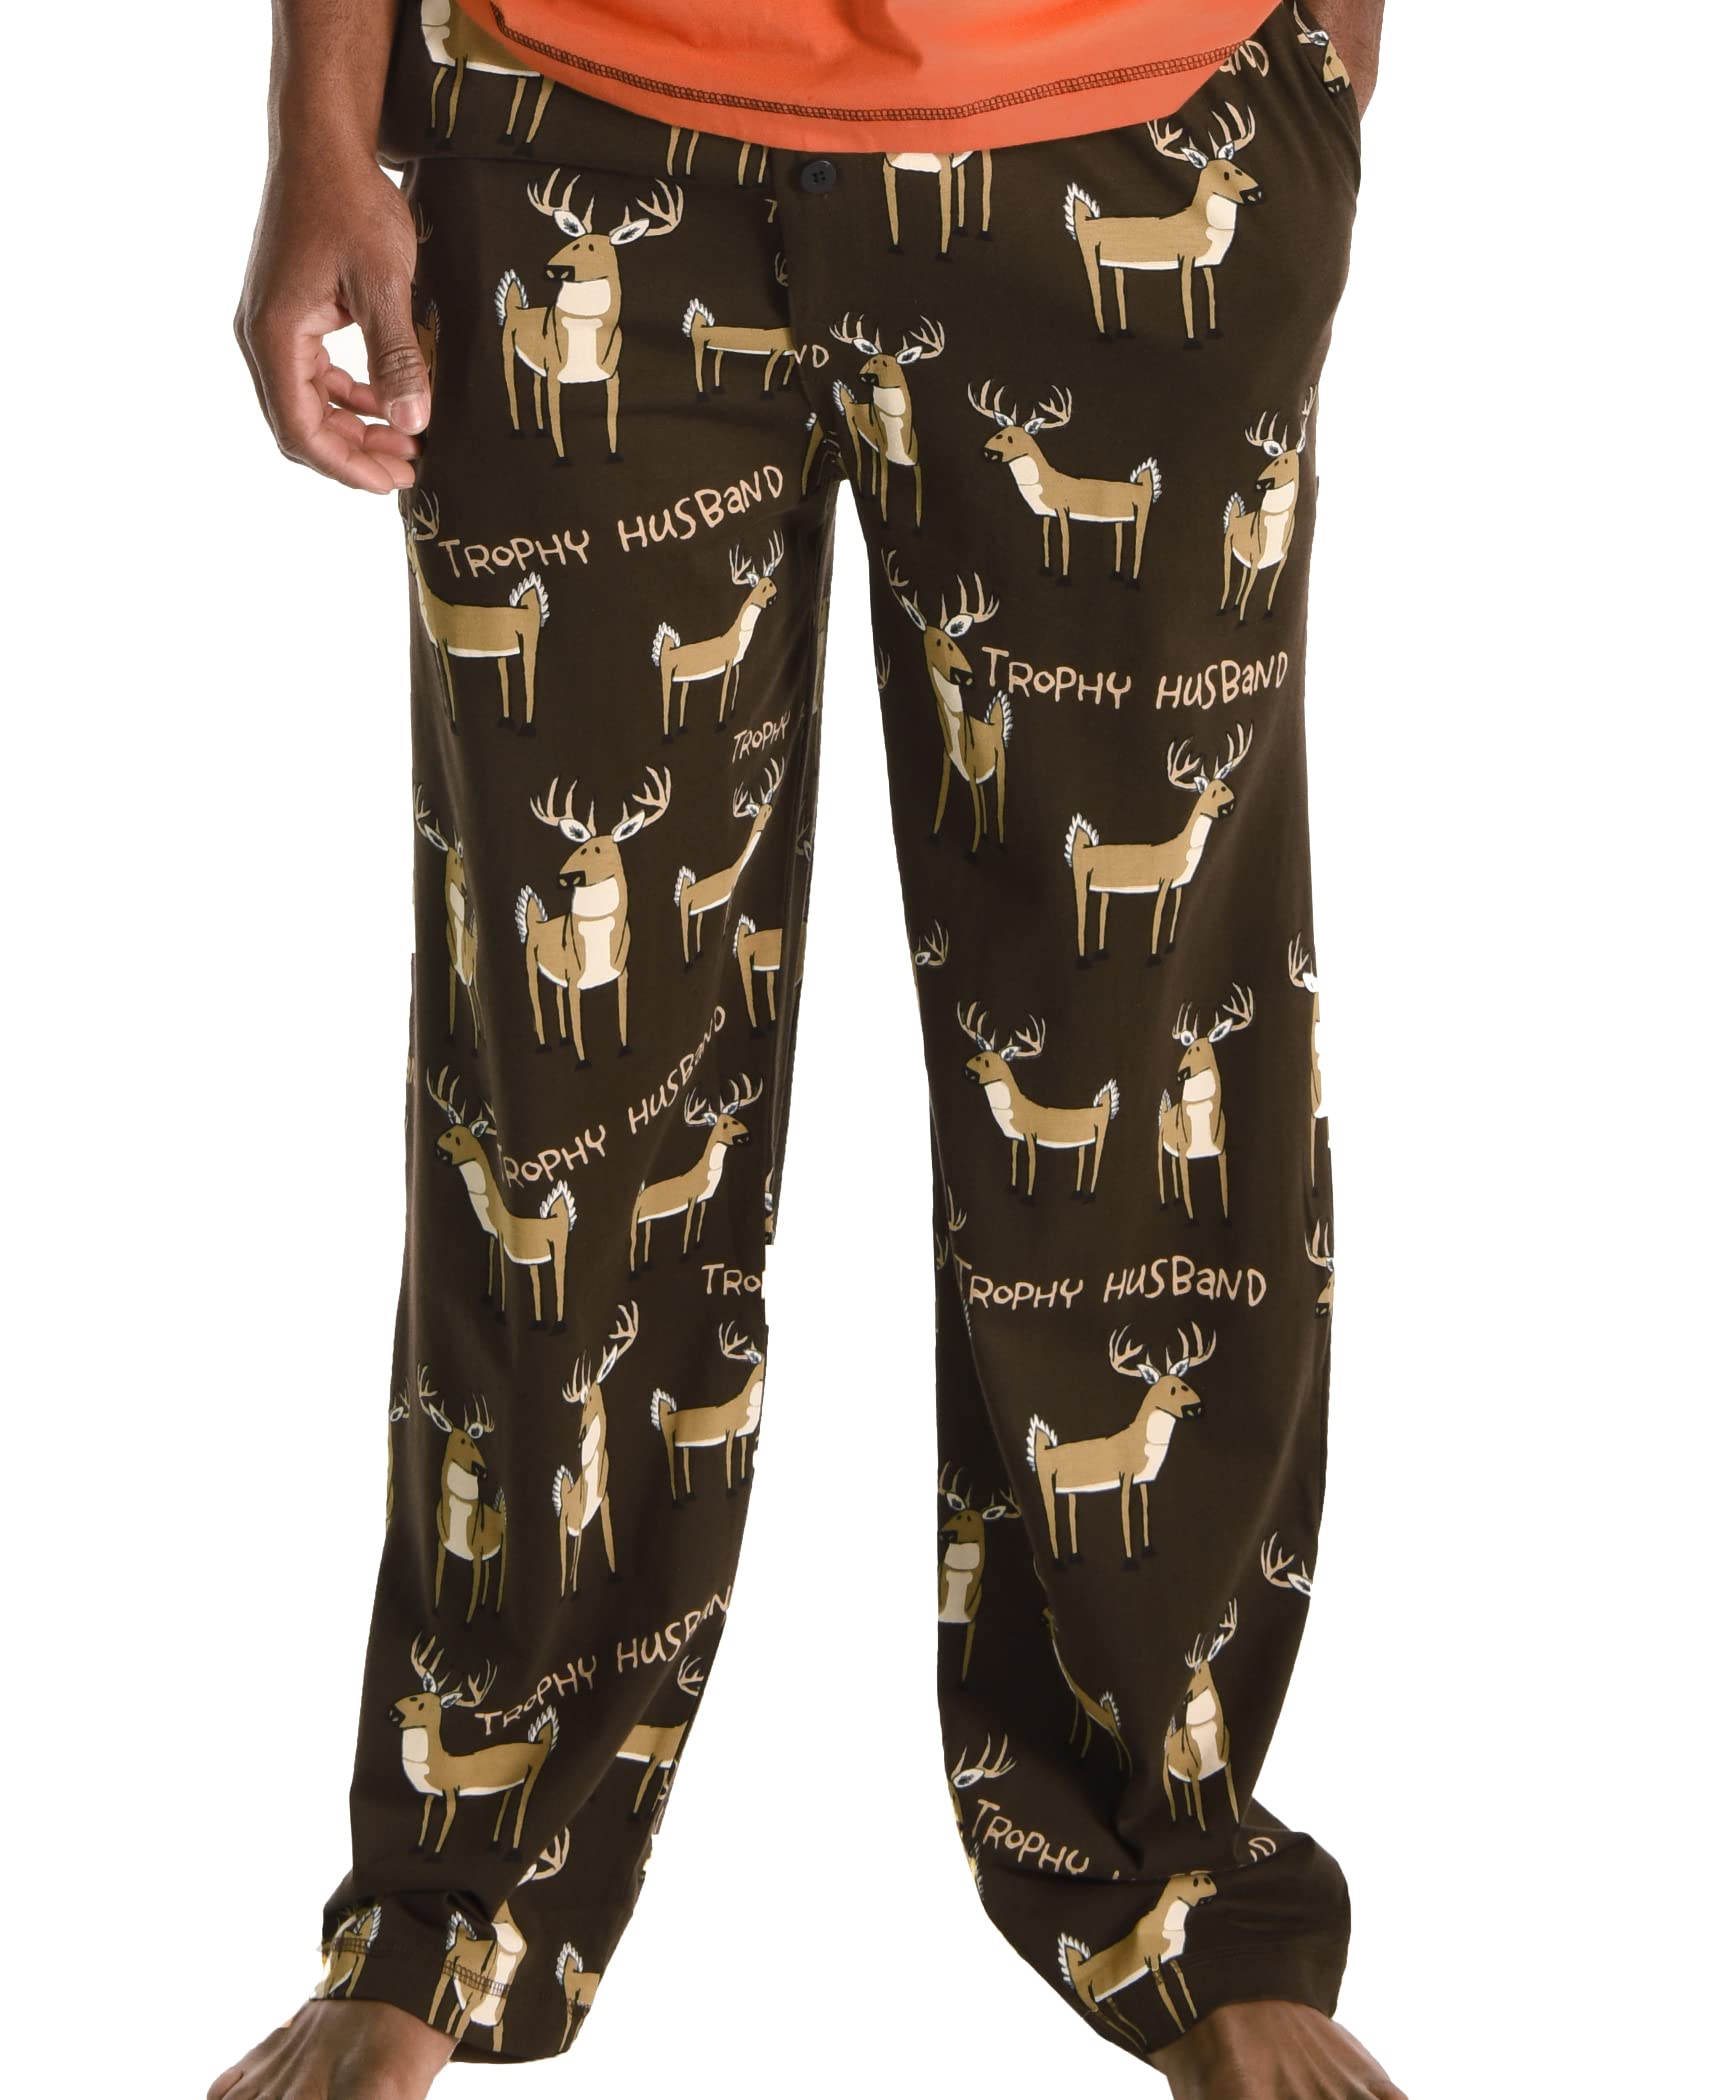 Lazy One Animal Pajama Pants for Men, Mens Separate Bottoms, Lounge Pants, Buck, Deer, Hunting (Trophy Husband, X-Small)